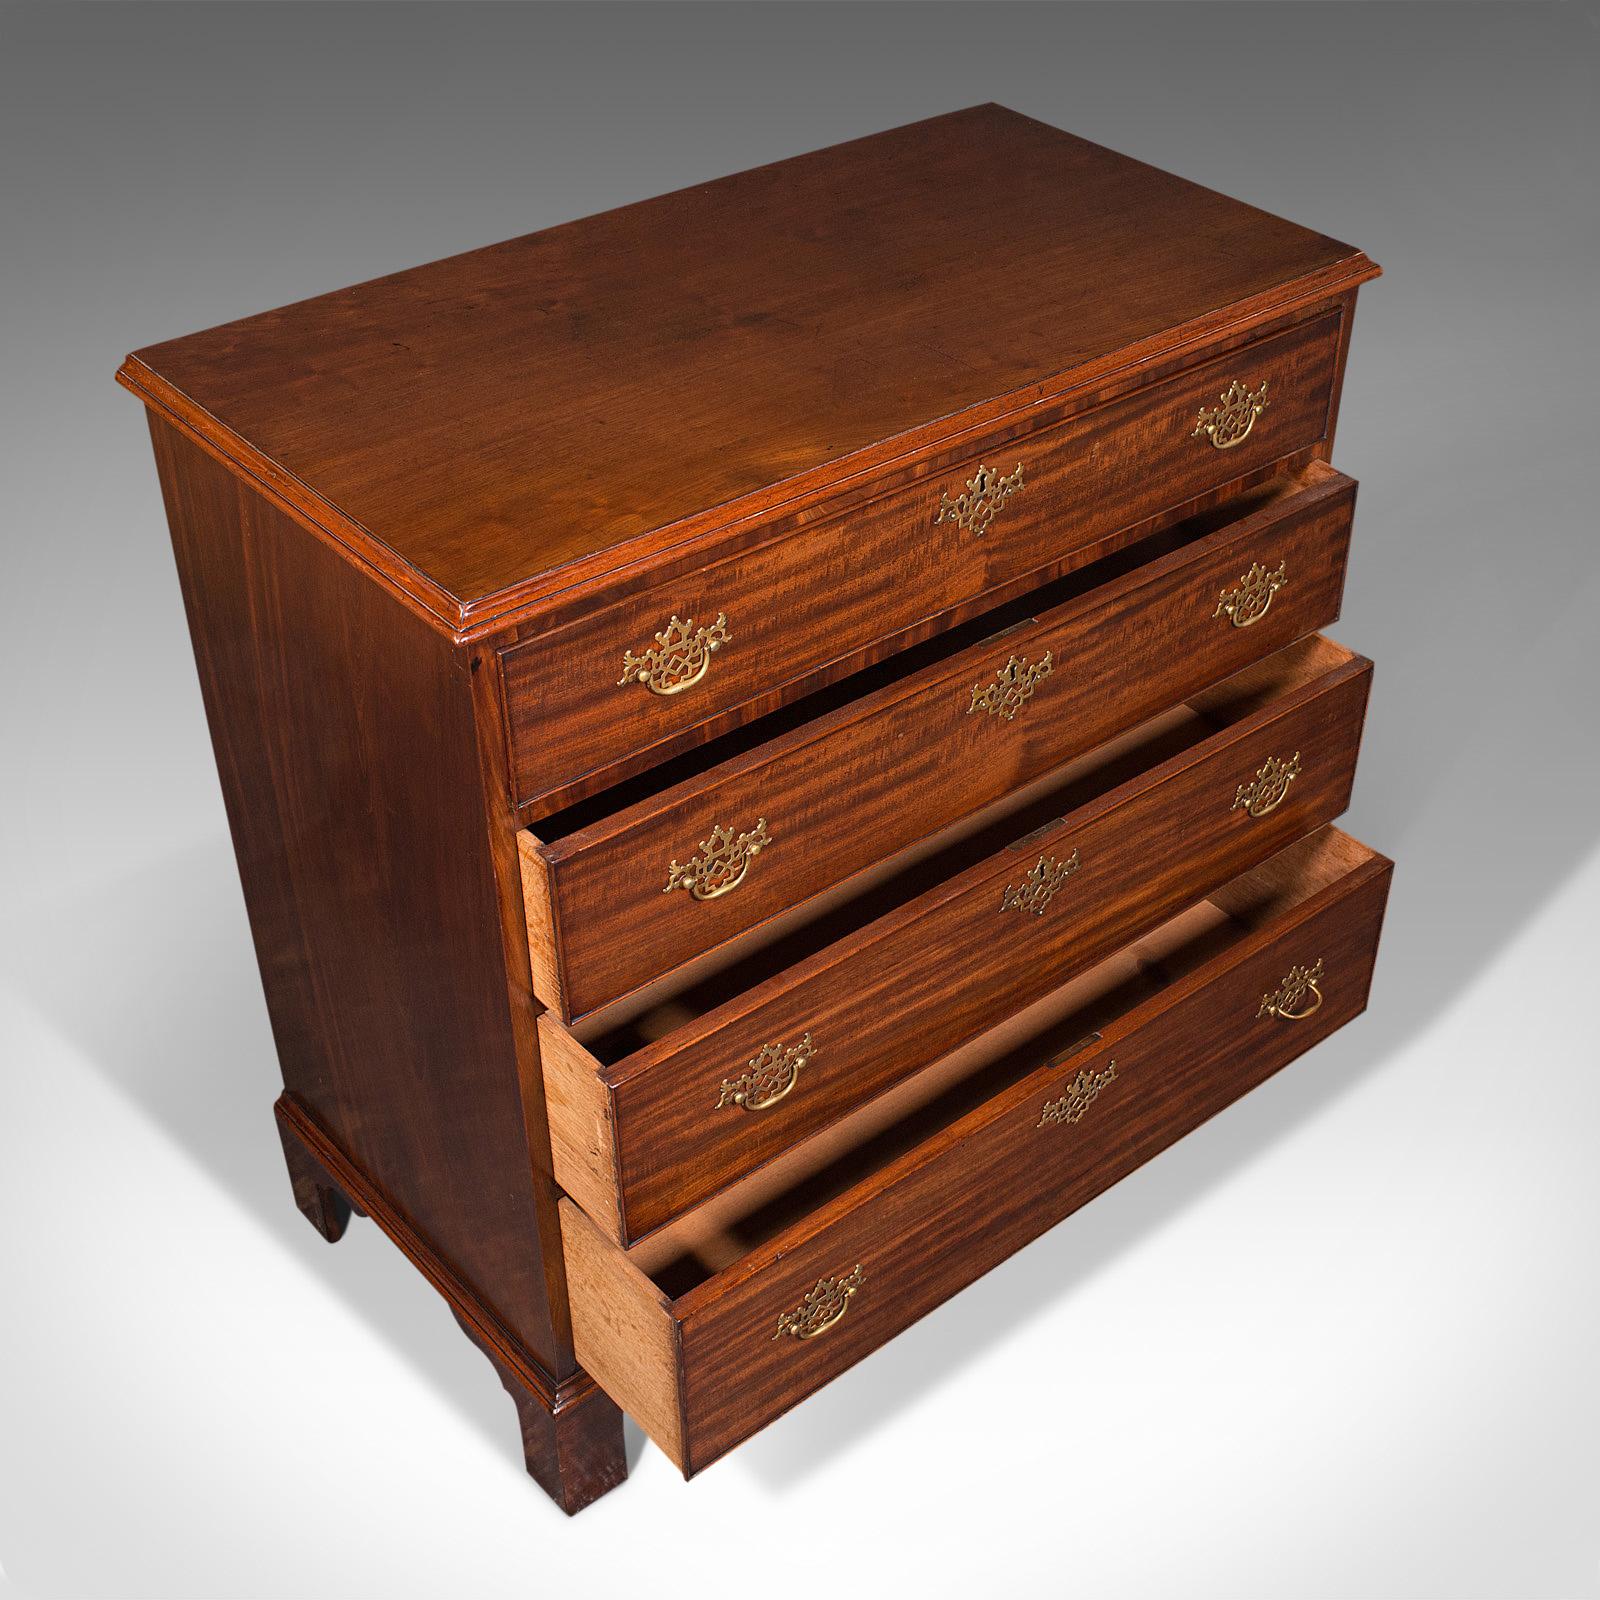 18th Century Antique Gentleman's Chest of Drawers, English, Mahogany, Bedroom, Georgian, 1800 For Sale